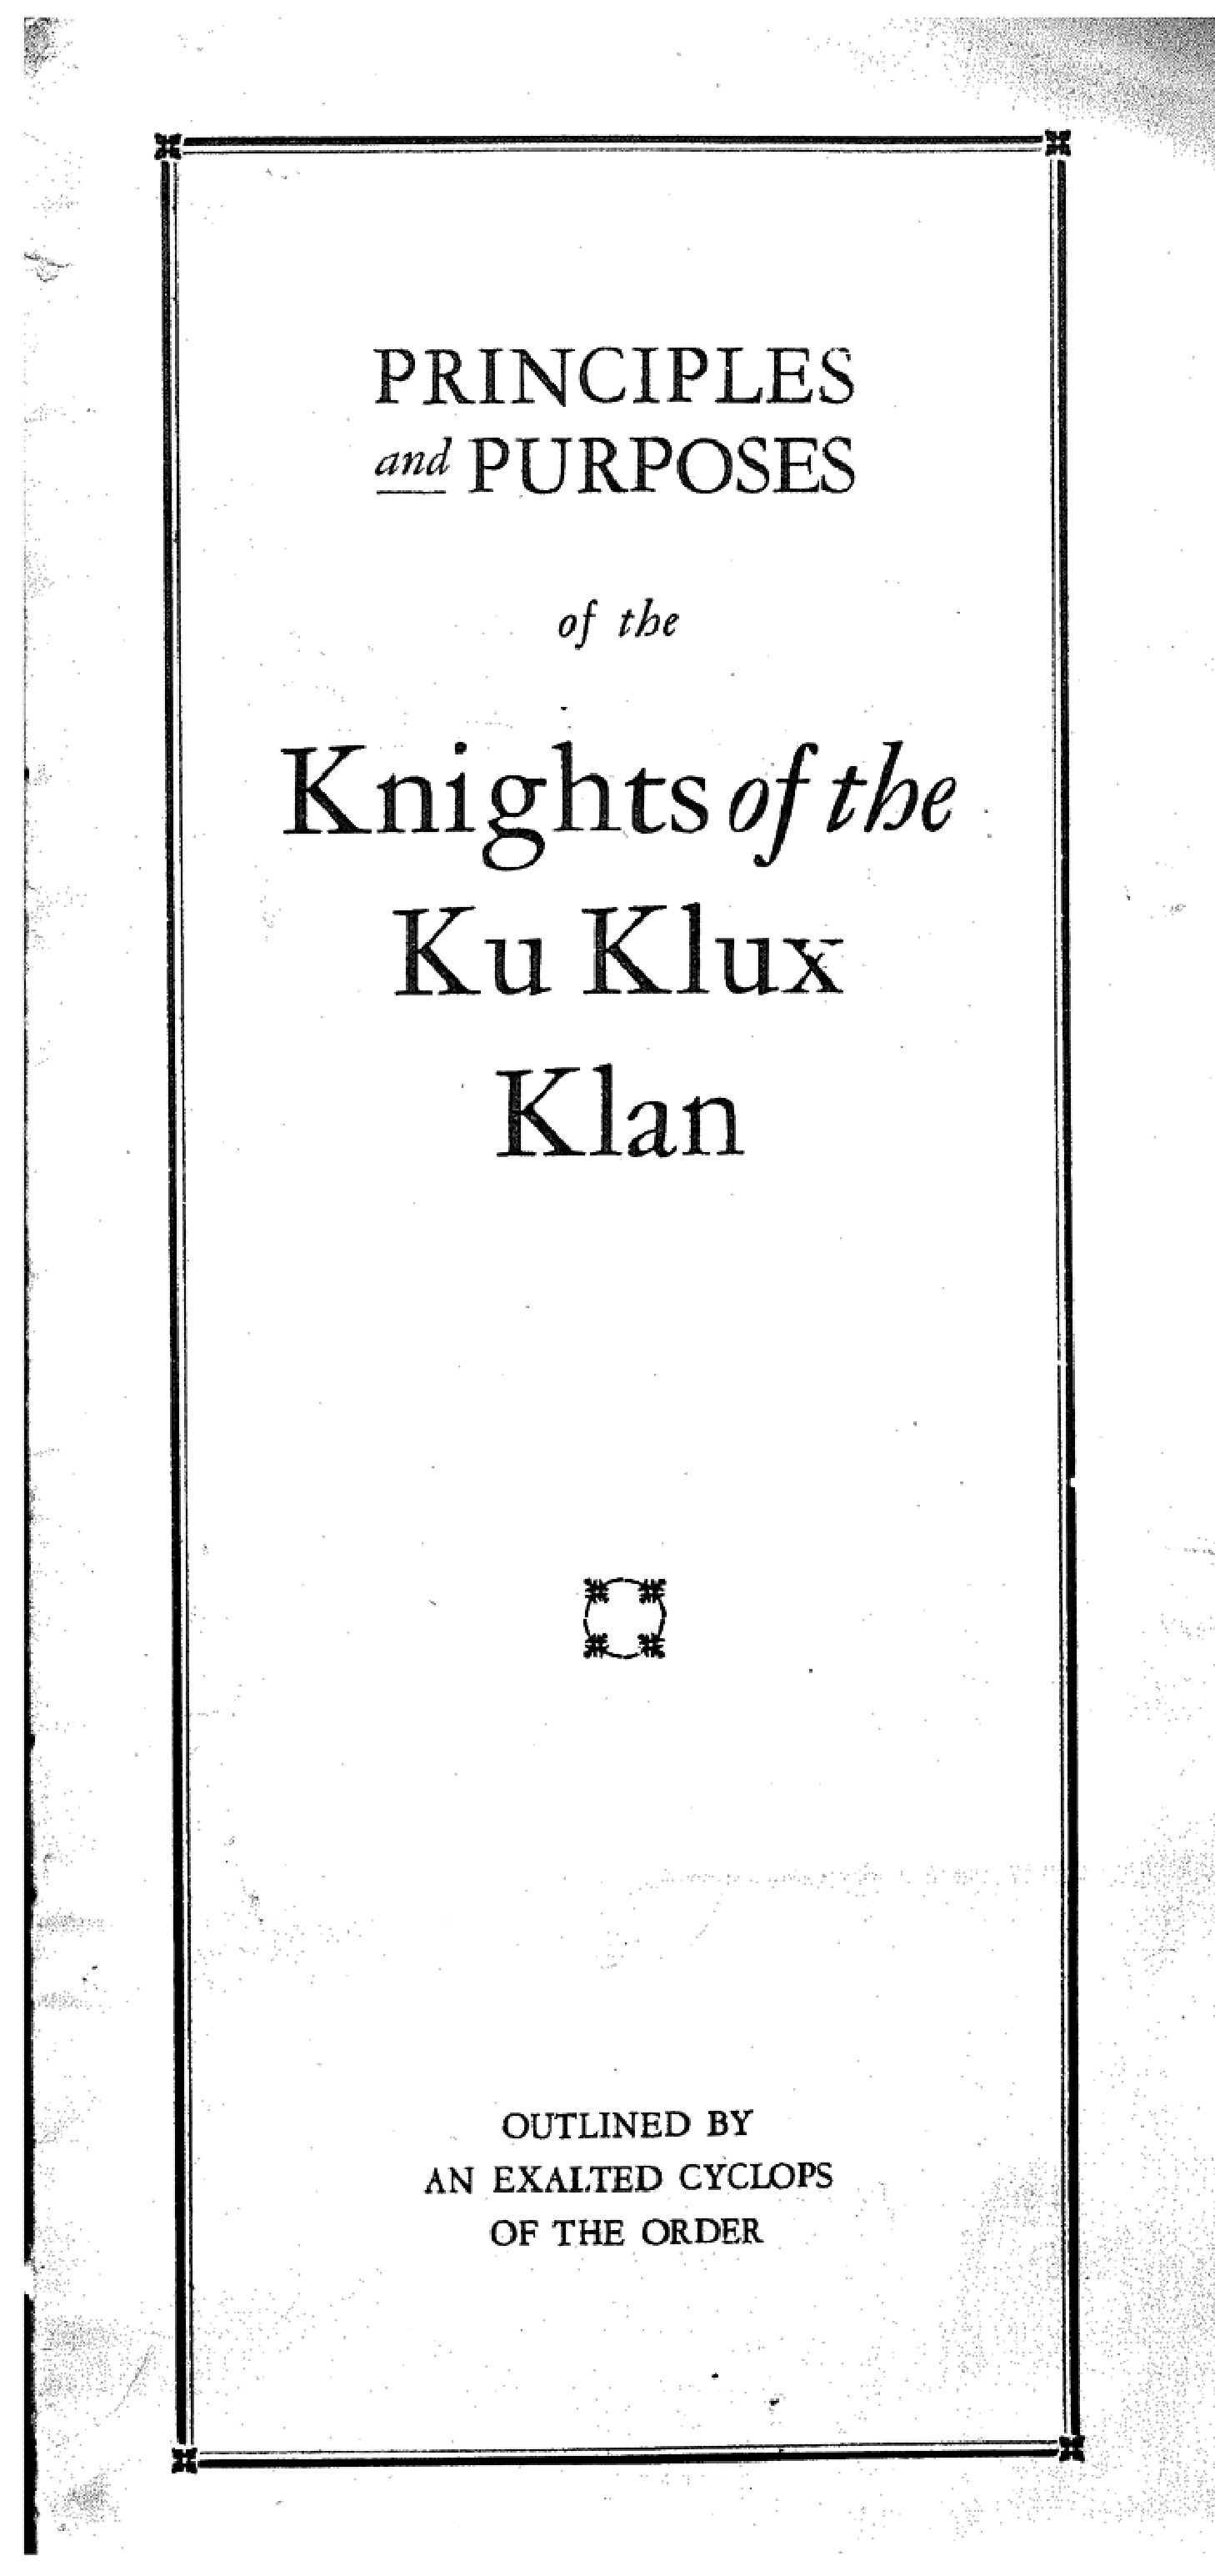 Principles and Purposes of the Knights of the Ku Klux Klan